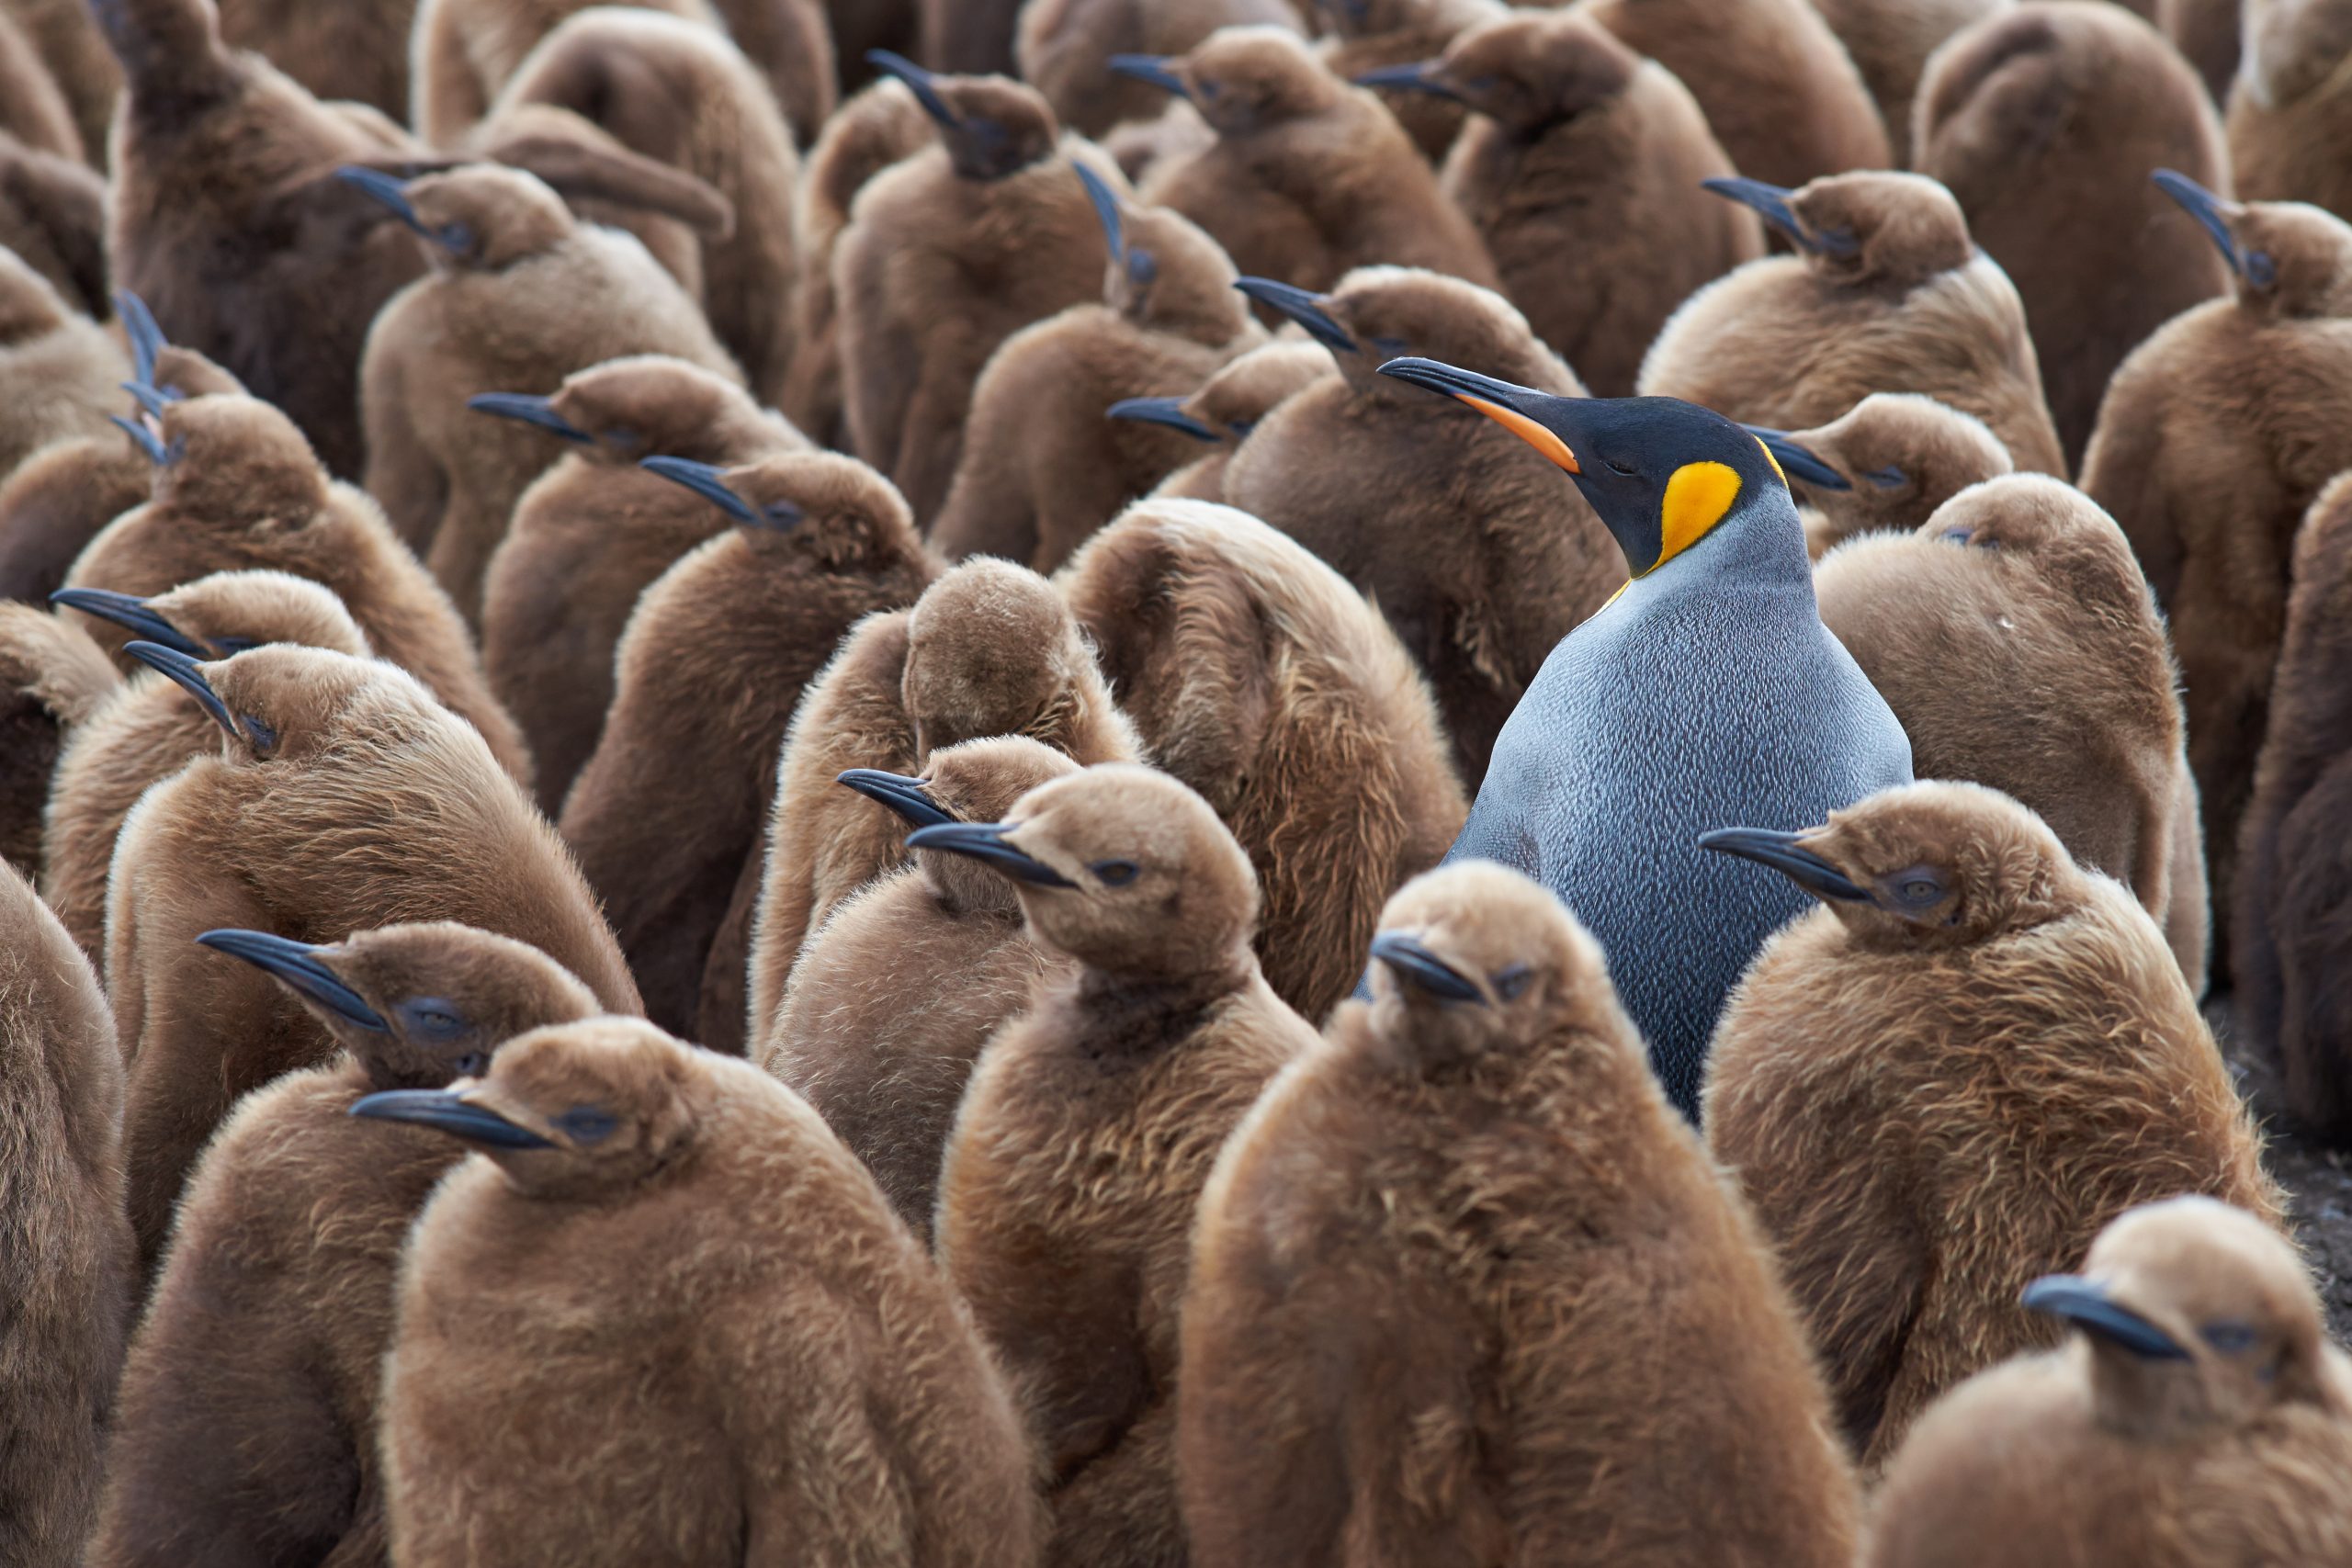 An image of an adult emperor penguin standing in a group of chicks